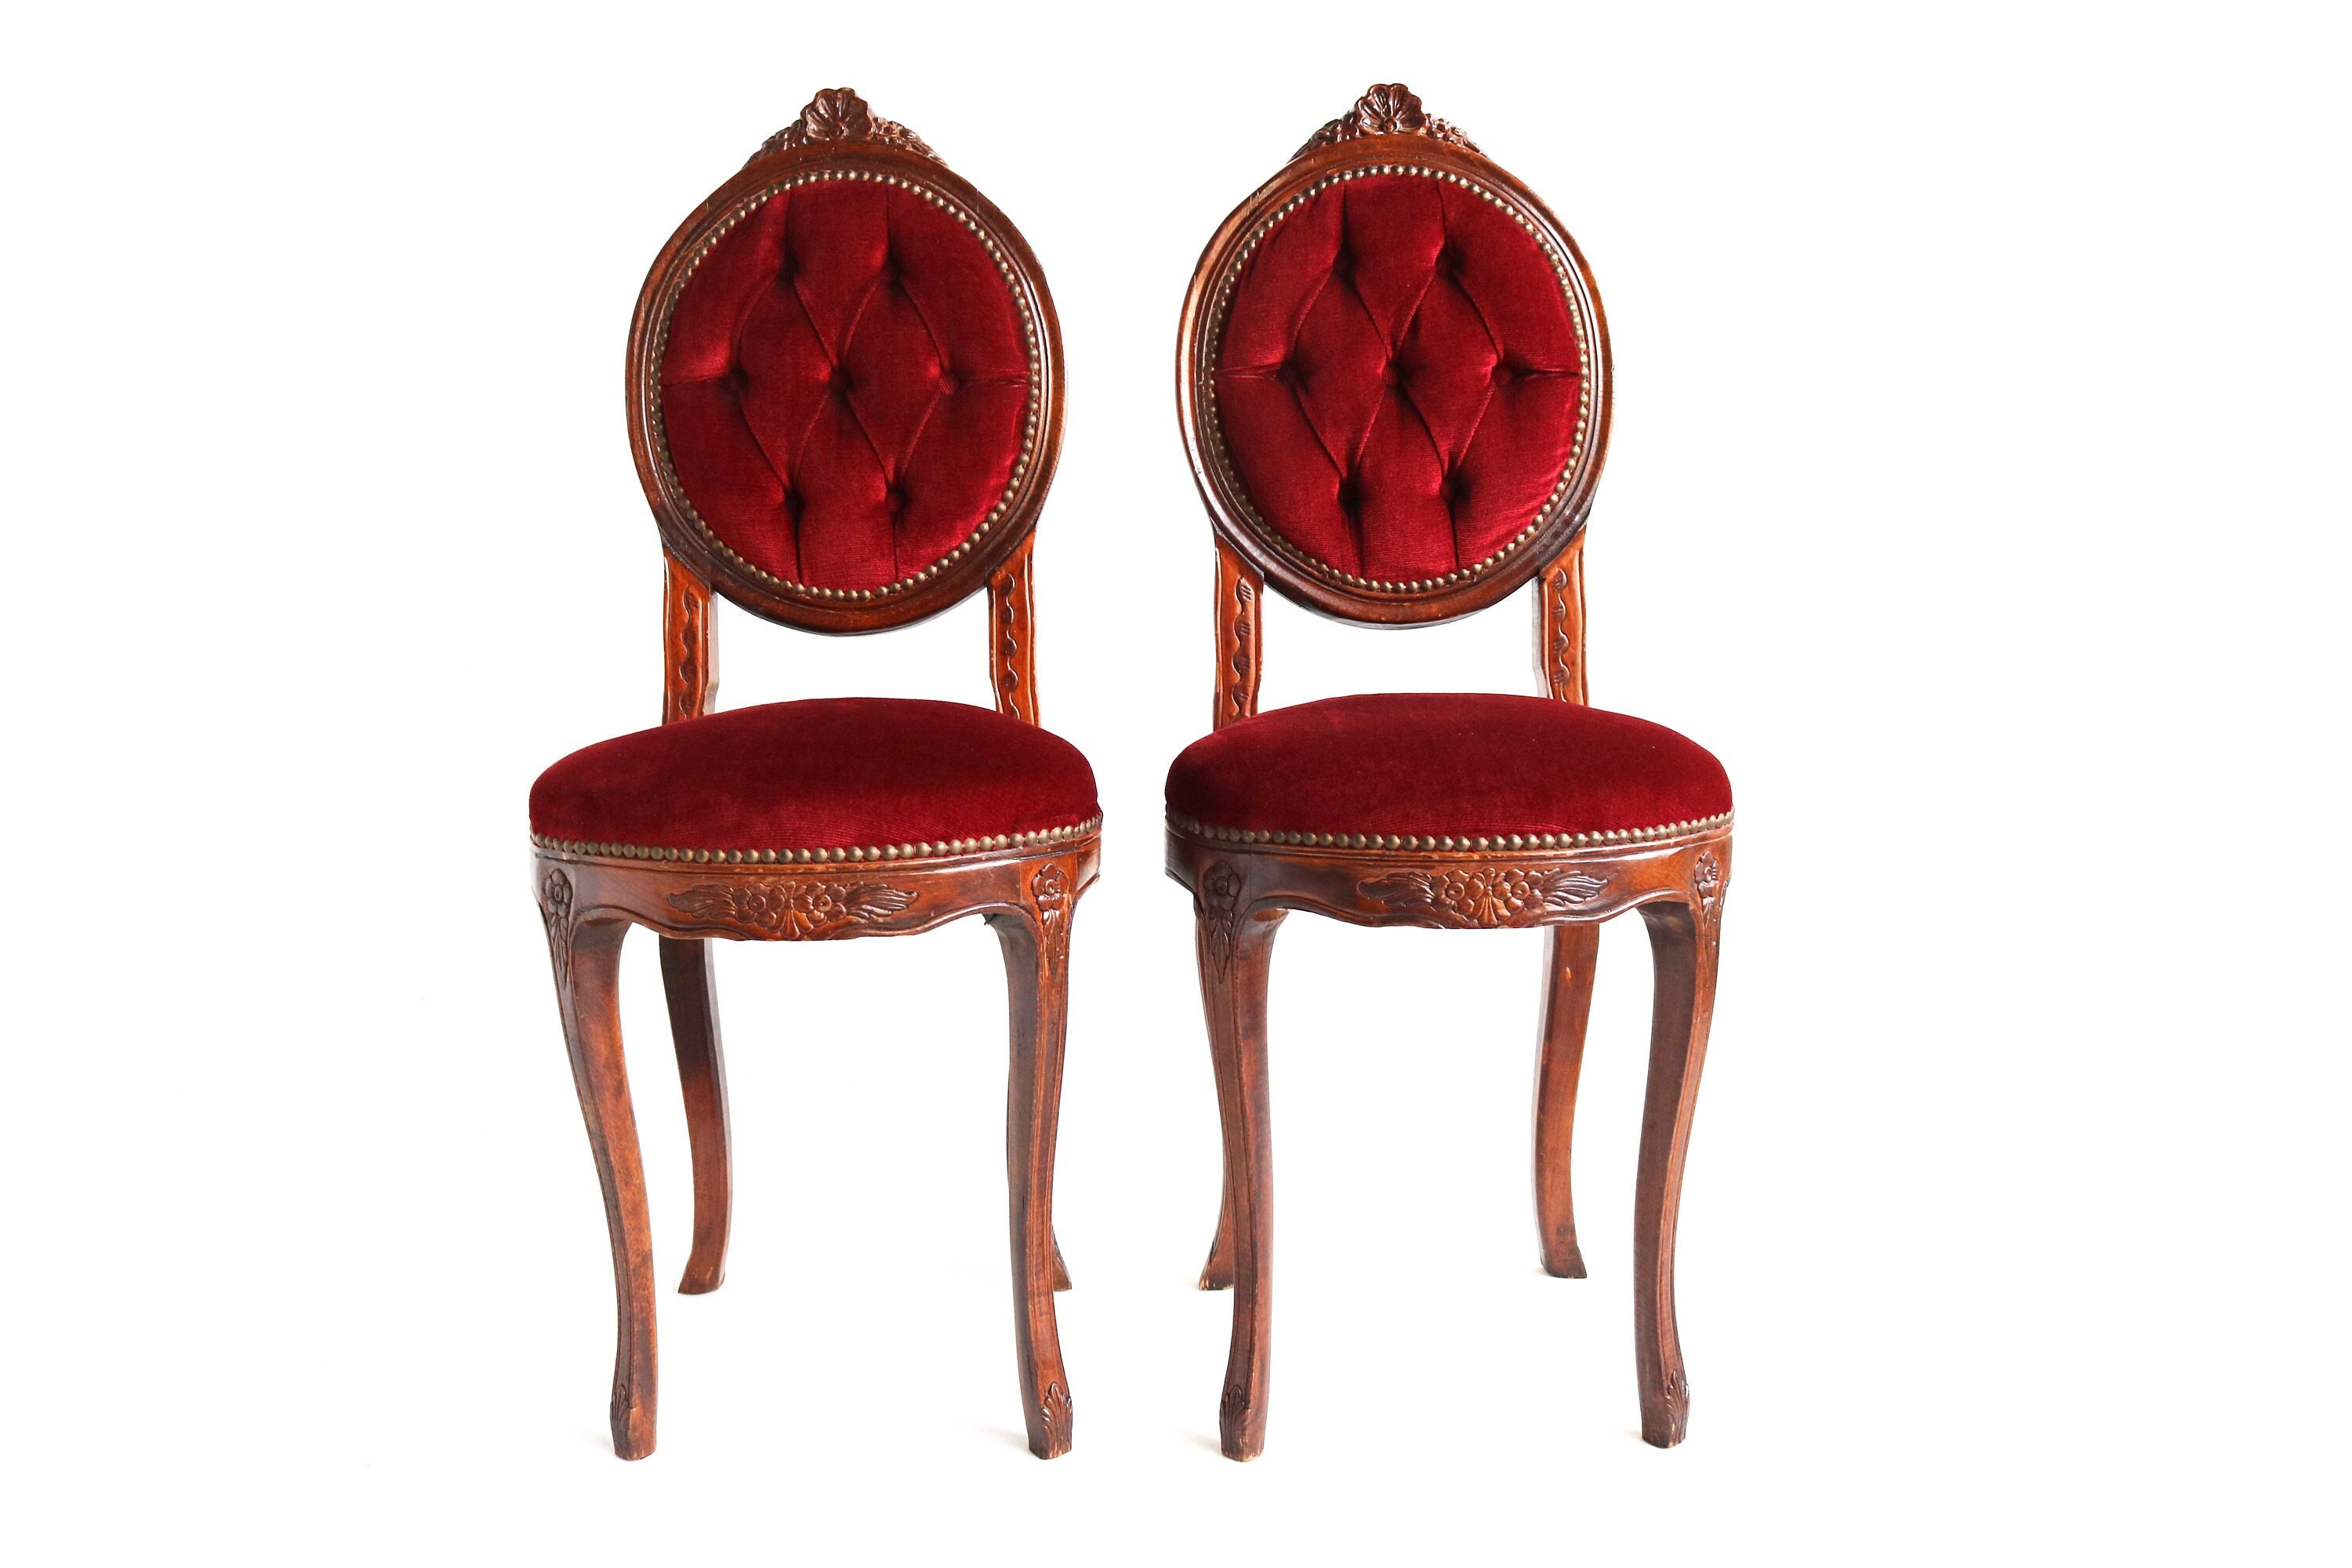 French Rococo Louis XV Giltwood and Cane Upholstered Fireside Chair  Attributed to Grosfeld House